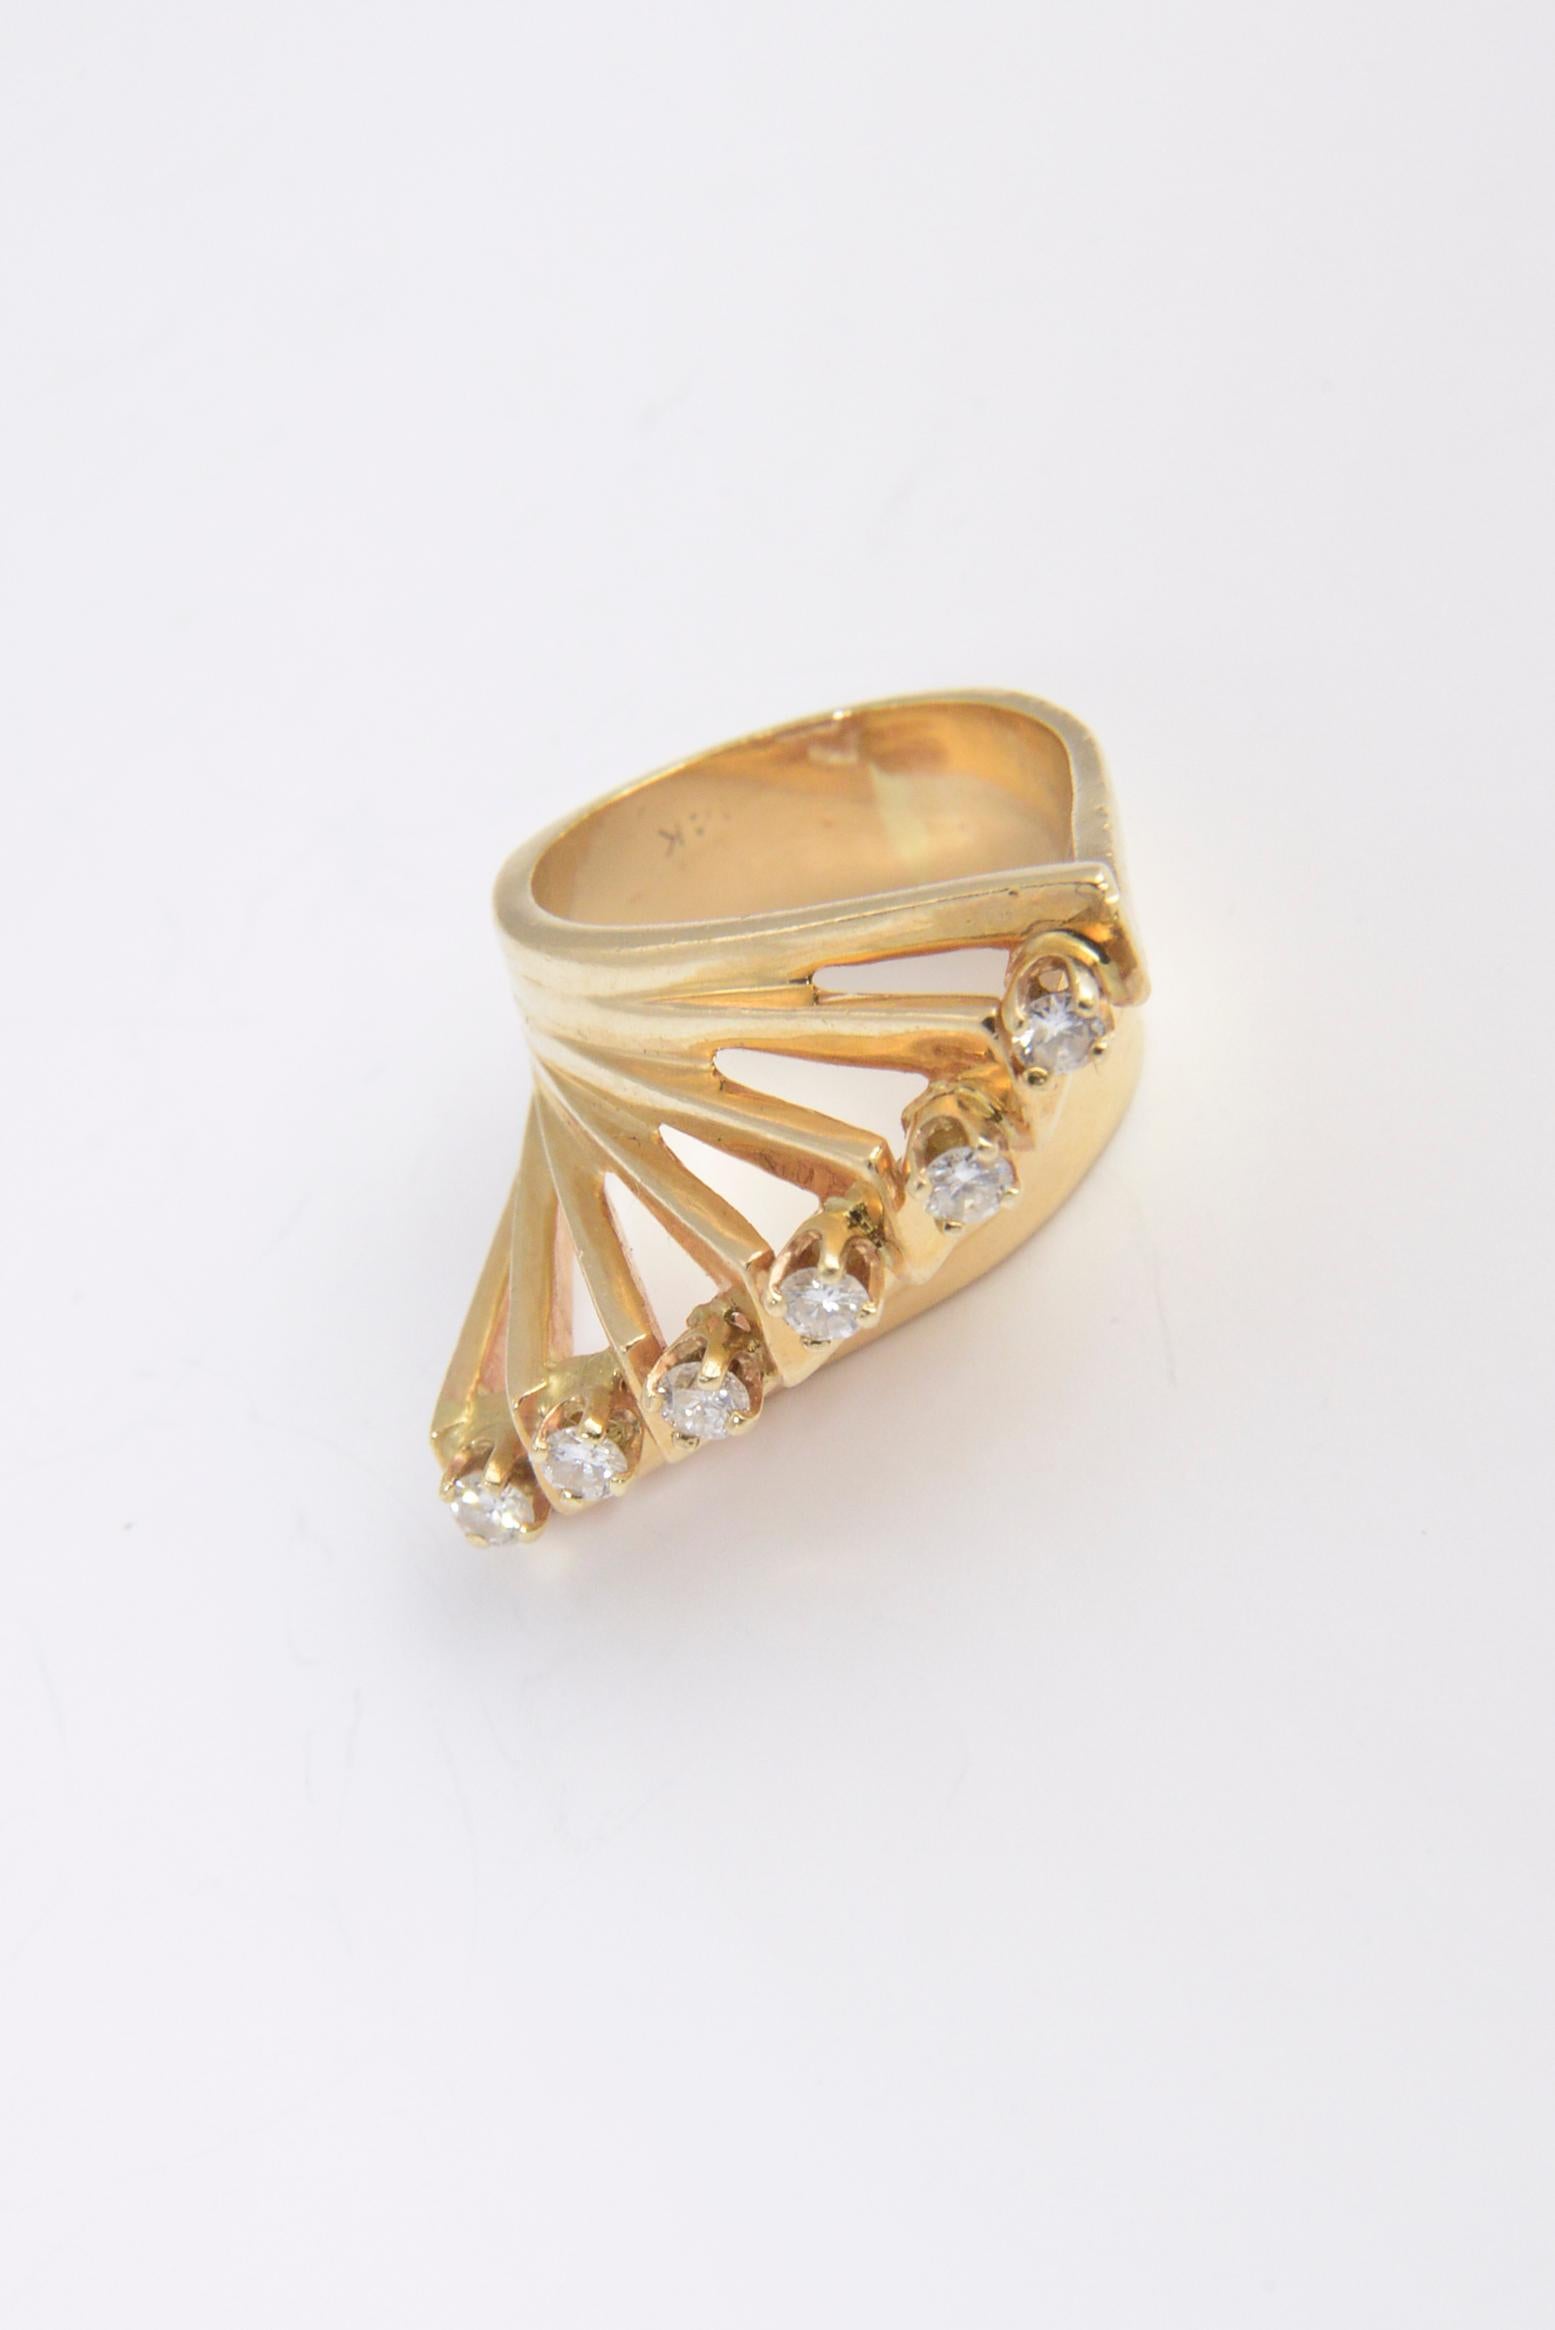 1970s Fantastic custom made modernist style ring manufactured by a jeweler for his step daughter.  The 14k yellow gold ring features a row of raised triangles that are diagonal.   At the tip of each triangle is a diamond that weight approximately